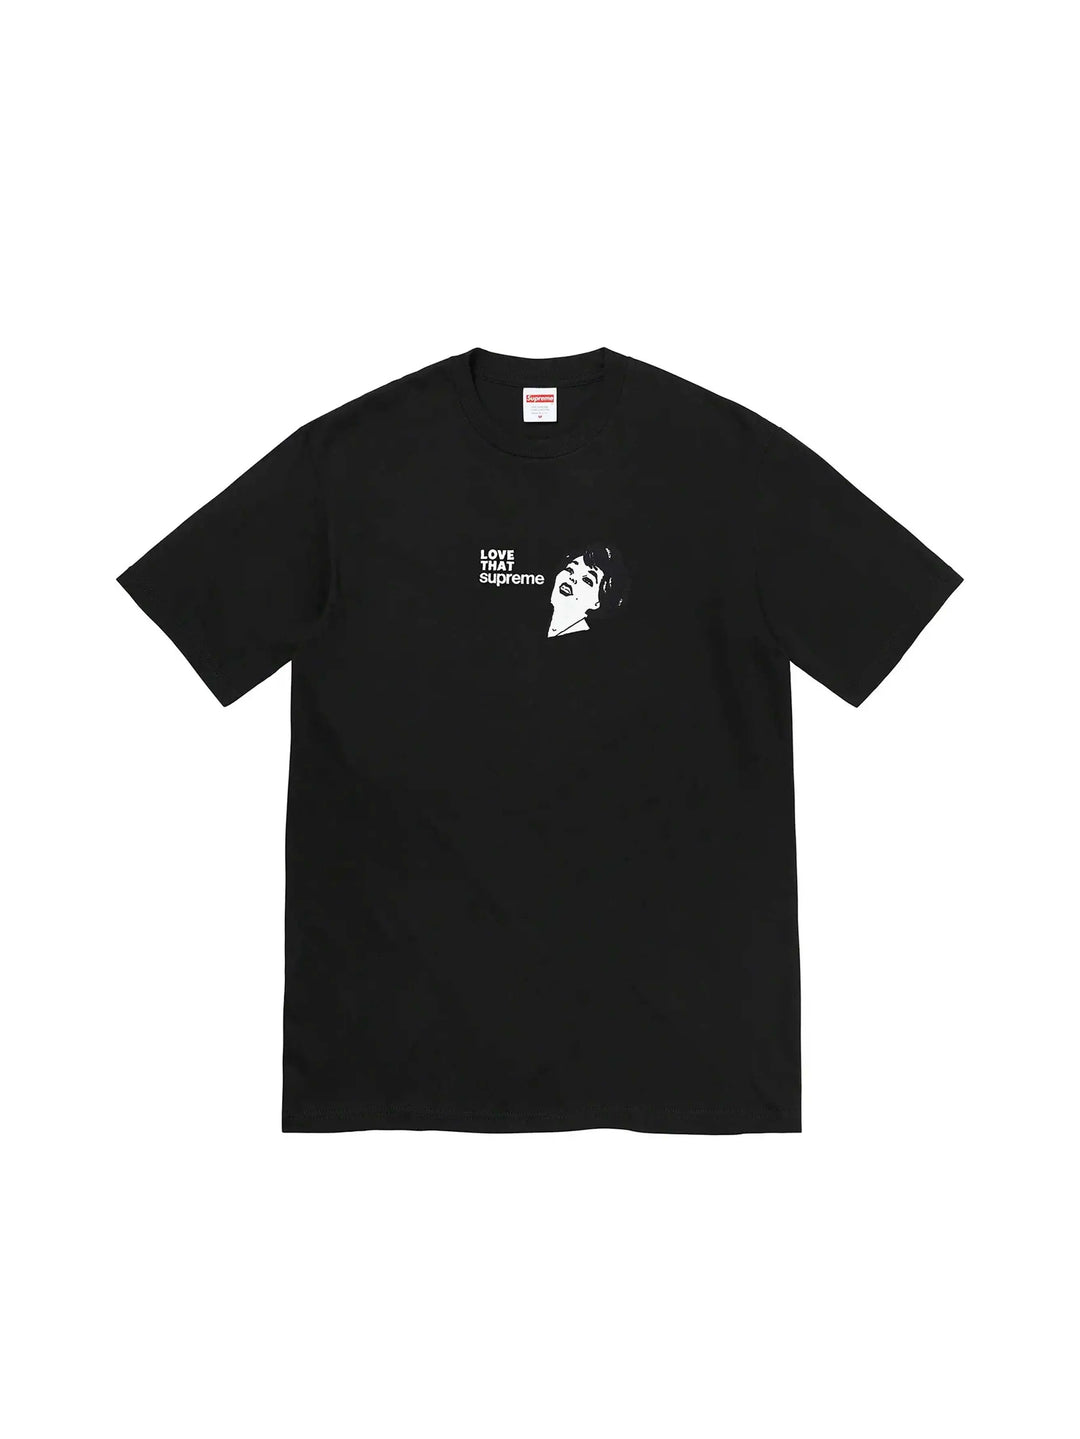 Supreme Love That Tee Black in Auckland, New Zealand - Shop name